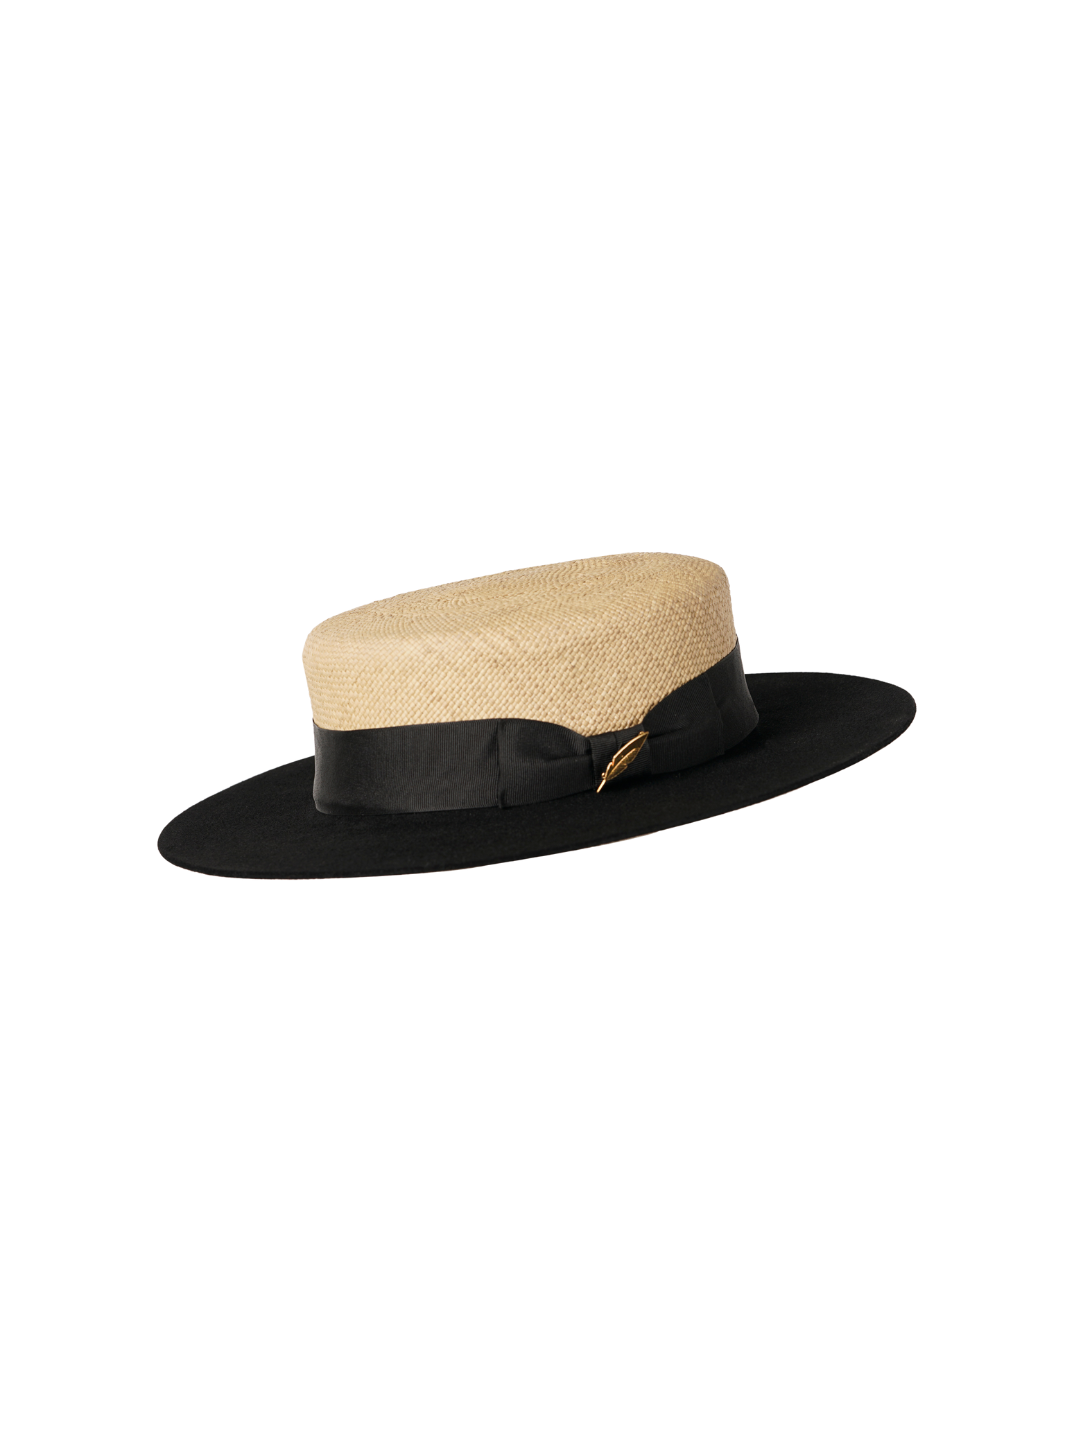 natural straw & felt hat Cordoban hat in walnut-colored iraca palm straw in the crown with black faya ribbon around it, the brim is in black felt 